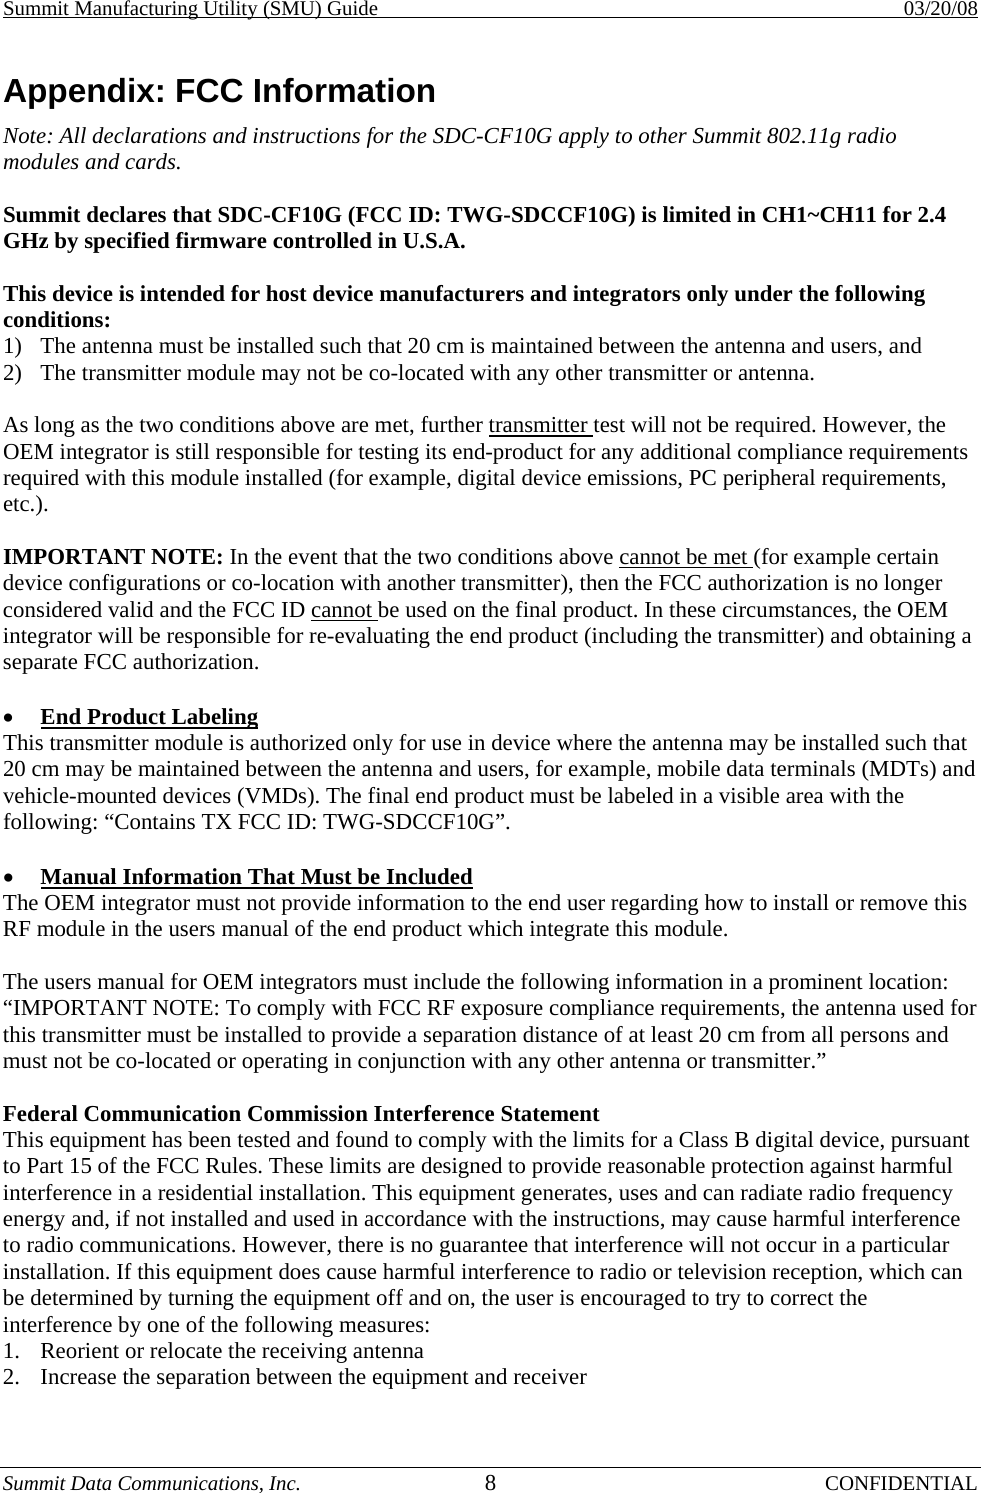 Summit Manufacturing Utility (SMU) Guide    03/20/08 Summit Data Communications, Inc.  8 CONFIDENTIAL Appendix: FCC Information Note: All declarations and instructions for the SDC-CF10G apply to other Summit 802.11g radio modules and cards.  Summit declares that SDC-CF10G (FCC ID: TWG-SDCCF10G) is limited in CH1~CH11 for 2.4 GHz by specified firmware controlled in U.S.A.   This device is intended for host device manufacturers and integrators only under the following conditions:  1)  The antenna must be installed such that 20 cm is maintained between the antenna and users, and  2)  The transmitter module may not be co-located with any other transmitter or antenna.   As long as the two conditions above are met, further transmitter test will not be required. However, the OEM integrator is still responsible for testing its end-product for any additional compliance requirements required with this module installed (for example, digital device emissions, PC peripheral requirements, etc.).   IMPORTANT NOTE: In the event that the two conditions above cannot be met (for example certain device configurations or co-location with another transmitter), then the FCC authorization is no longer considered valid and the FCC ID cannot be used on the final product. In these circumstances, the OEM integrator will be responsible for re-evaluating the end product (including the transmitter) and obtaining a separate FCC authorization.   •  End Product Labeling  This transmitter module is authorized only for use in device where the antenna may be installed such that 20 cm may be maintained between the antenna and users, for example, mobile data terminals (MDTs) and vehicle-mounted devices (VMDs). The final end product must be labeled in a visible area with the following: “Contains TX FCC ID: TWG-SDCCF10G”.   •  Manual Information That Must be Included  The OEM integrator must not provide information to the end user regarding how to install or remove this RF module in the users manual of the end product which integrate this module.   The users manual for OEM integrators must include the following information in a prominent location: “IMPORTANT NOTE: To comply with FCC RF exposure compliance requirements, the antenna used for this transmitter must be installed to provide a separation distance of at least 20 cm from all persons and must not be co-located or operating in conjunction with any other antenna or transmitter.”  Federal Communication Commission Interference Statement  This equipment has been tested and found to comply with the limits for a Class B digital device, pursuant to Part 15 of the FCC Rules. These limits are designed to provide reasonable protection against harmful interference in a residential installation. This equipment generates, uses and can radiate radio frequency energy and, if not installed and used in accordance with the instructions, may cause harmful interference to radio communications. However, there is no guarantee that interference will not occur in a particular installation. If this equipment does cause harmful interference to radio or television reception, which can be determined by turning the equipment off and on, the user is encouraged to try to correct the interference by one of the following measures:  1.  Reorient or relocate the receiving antenna  2.  Increase the separation between the equipment and receiver 